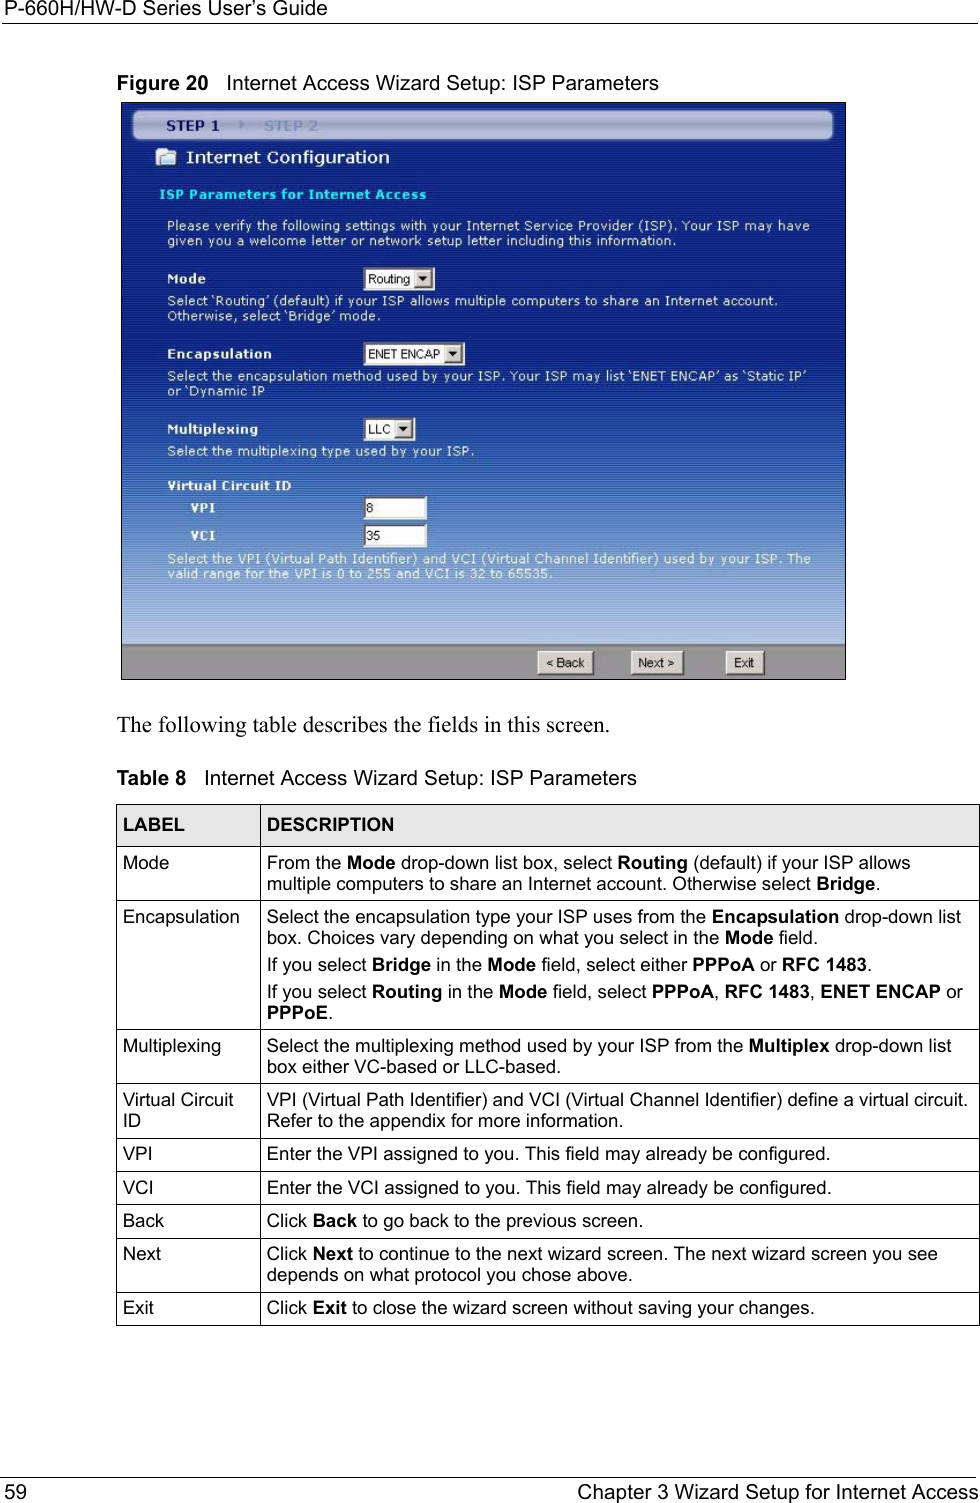 P-660H/HW-D Series User’s Guide59 Chapter 3 Wizard Setup for Internet AccessFigure 20   Internet Access Wizard Setup: ISP ParametersThe following table describes the fields in this screen.Table 8   Internet Access Wizard Setup: ISP ParametersLABEL DESCRIPTIONMode From the Mode drop-down list box, select Routing (default) if your ISP allows multiple computers to share an Internet account. Otherwise select Bridge. Encapsulation Select the encapsulation type your ISP uses from the Encapsulation drop-down list box. Choices vary depending on what you select in the Mode field.  If you select Bridge in the Mode field, select either PPPoA or RFC 1483. If you select Routing in the Mode field, select PPPoA, RFC 1483, ENET ENCAP or PPPoE.Multiplexing Select the multiplexing method used by your ISP from the Multiplex drop-down list box either VC-based or LLC-based. Virtual Circuit IDVPI (Virtual Path Identifier) and VCI (Virtual Channel Identifier) define a virtual circuit. Refer to the appendix for more information.VPI Enter the VPI assigned to you. This field may already be configured.VCI Enter the VCI assigned to you. This field may already be configured.Back Click Back to go back to the previous screen.Next Click Next to continue to the next wizard screen. The next wizard screen you see depends on what protocol you chose above. Exit Click Exit to close the wizard screen without saving your changes.